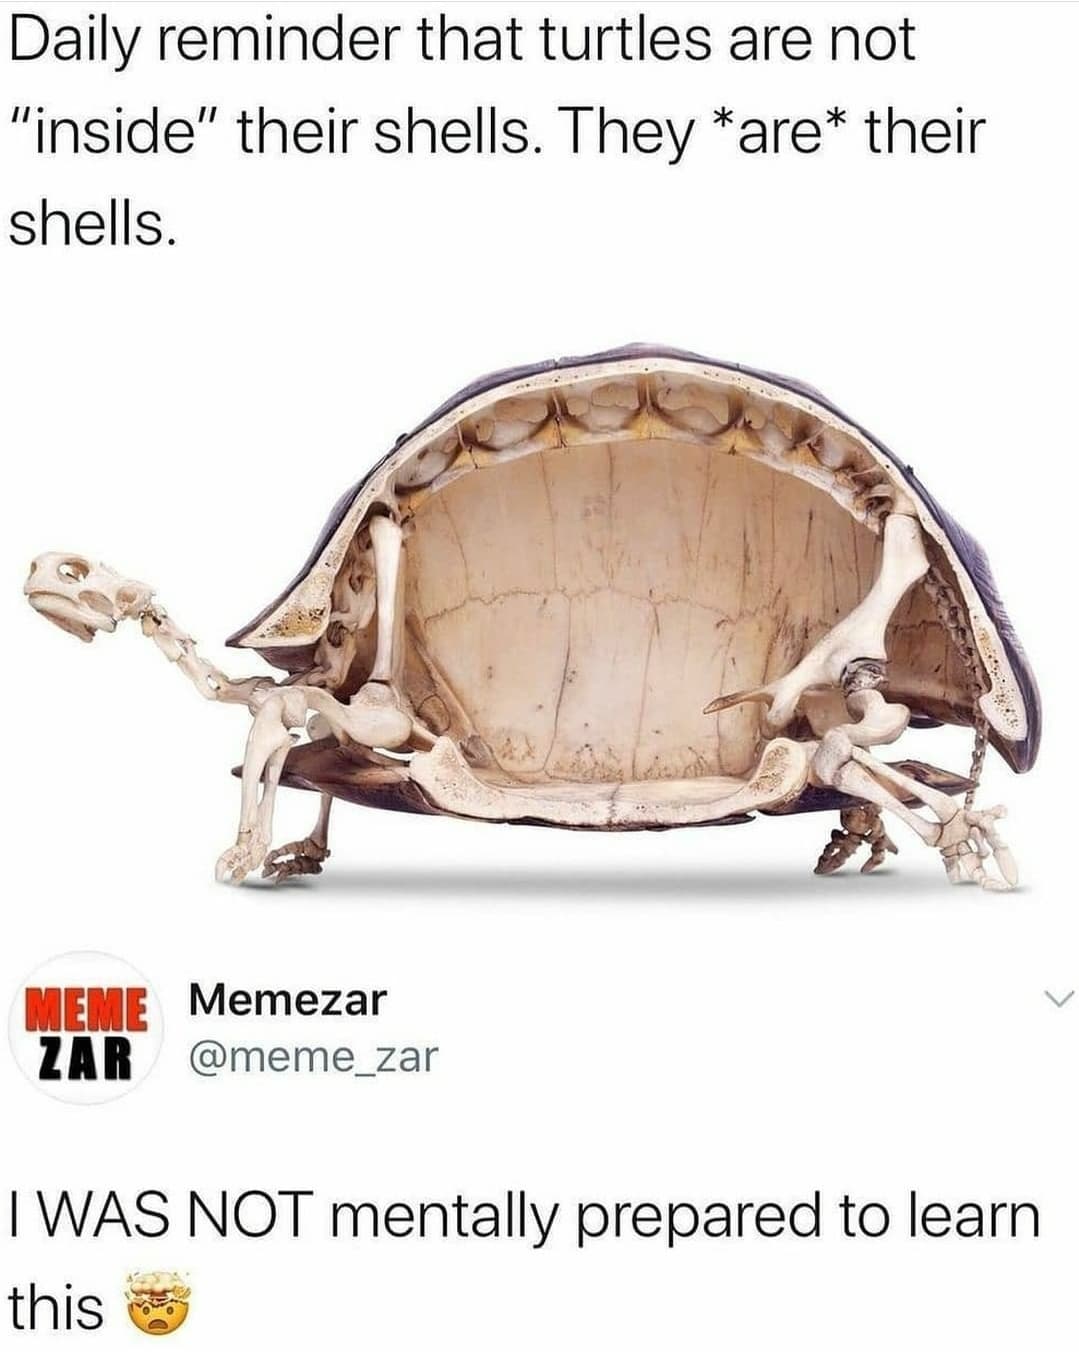 turtles are not inside their shells - Daily reminder that turtles are not "inside" their shells. They are their shells. Meme Memezar Zar Iwas Not mentally prepared to learn this